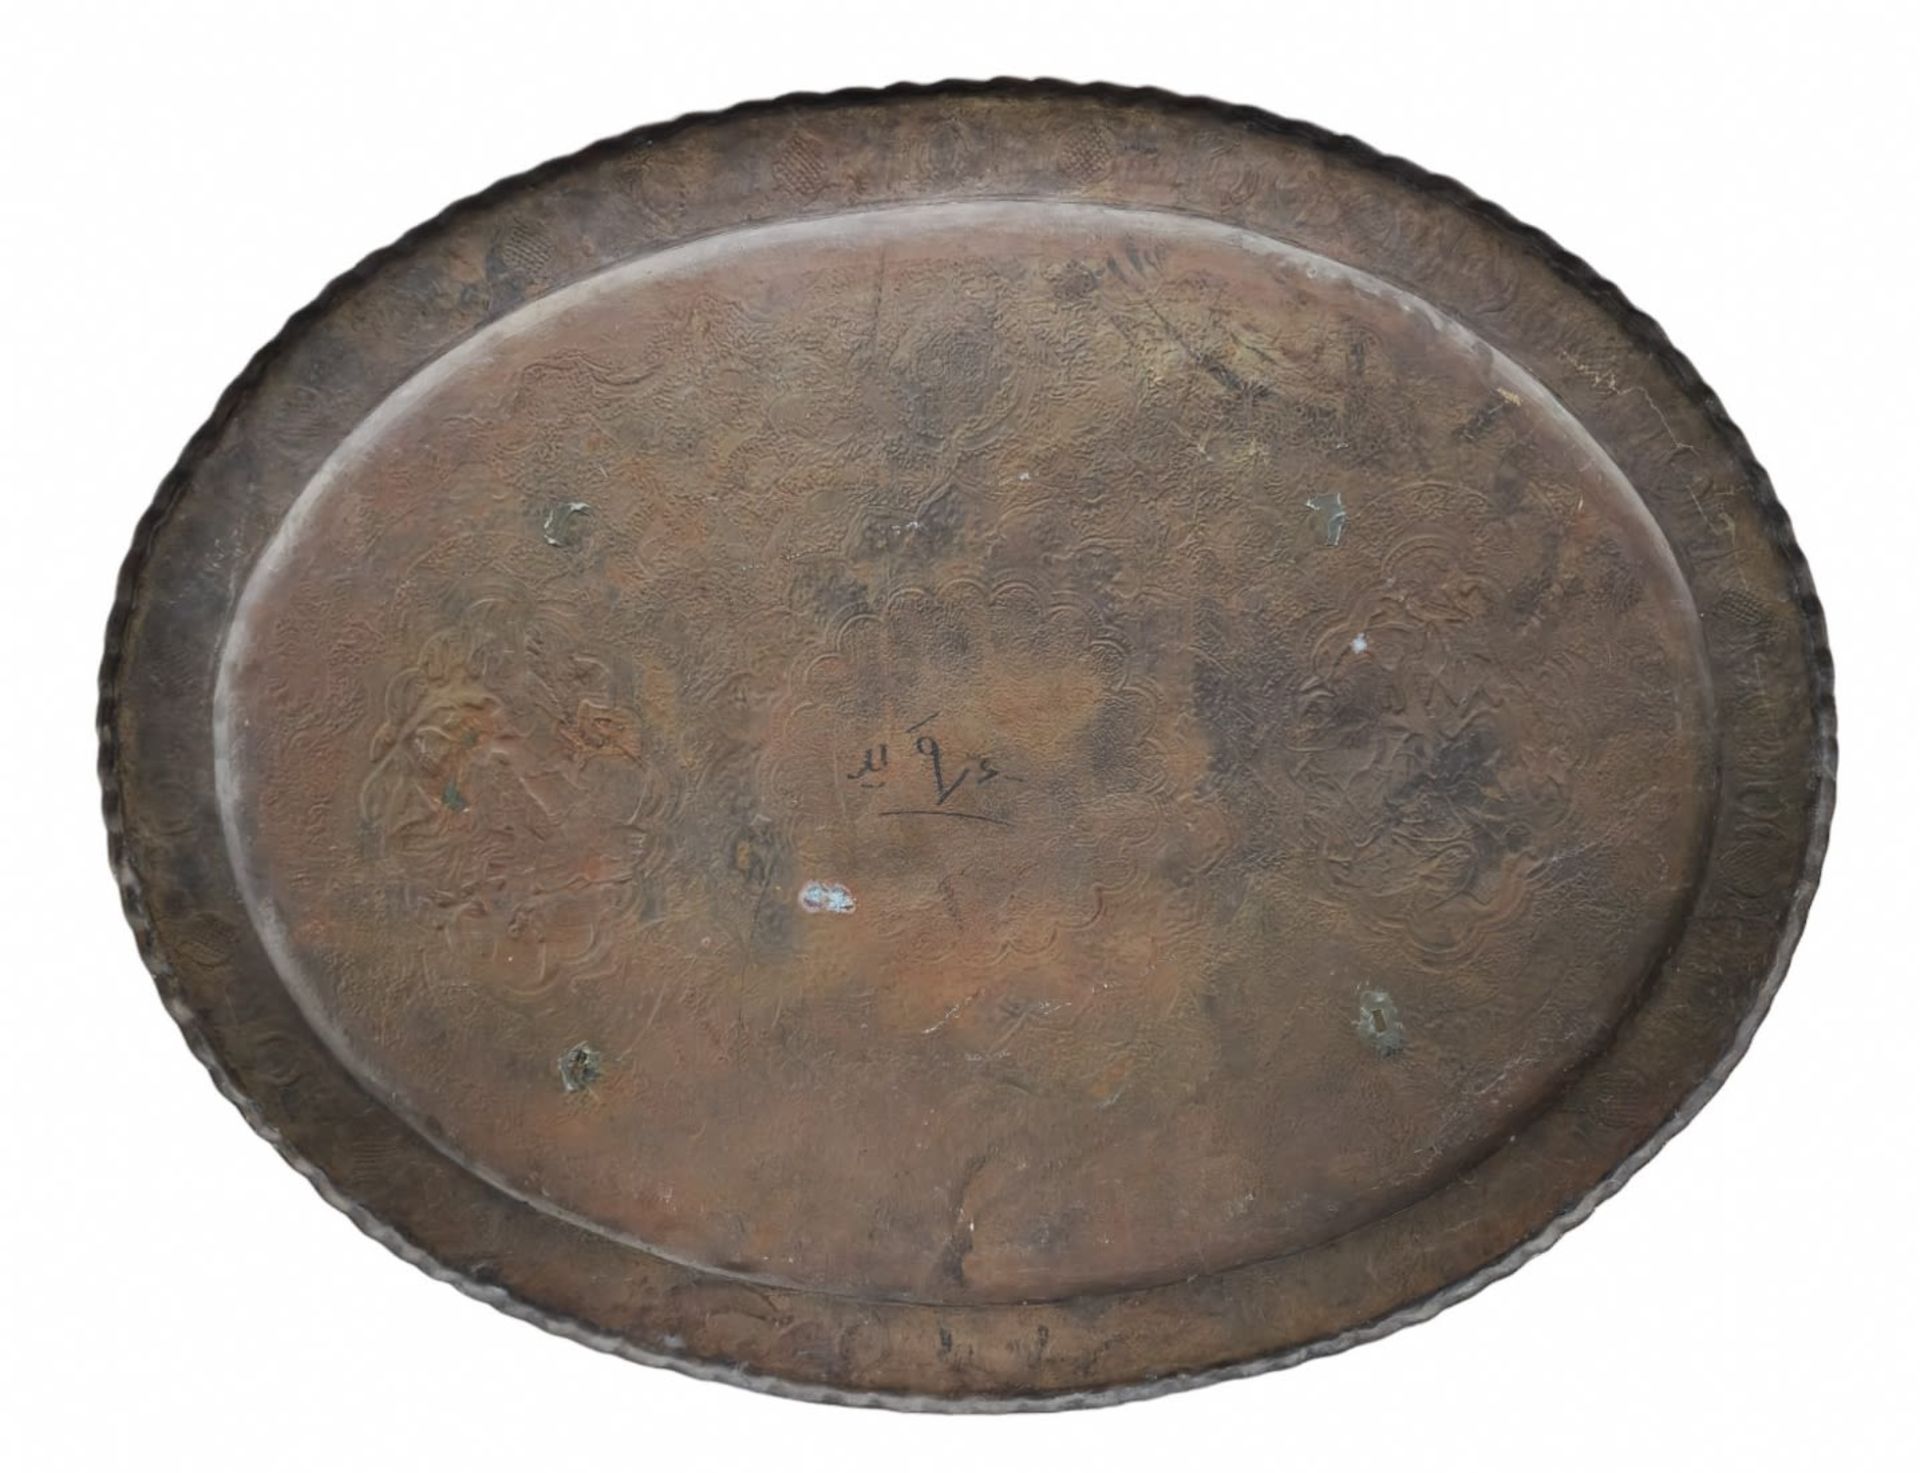 An antique and large Islamic tray made of copper, decorated with manual embroidery work in a dense - Bild 4 aus 4